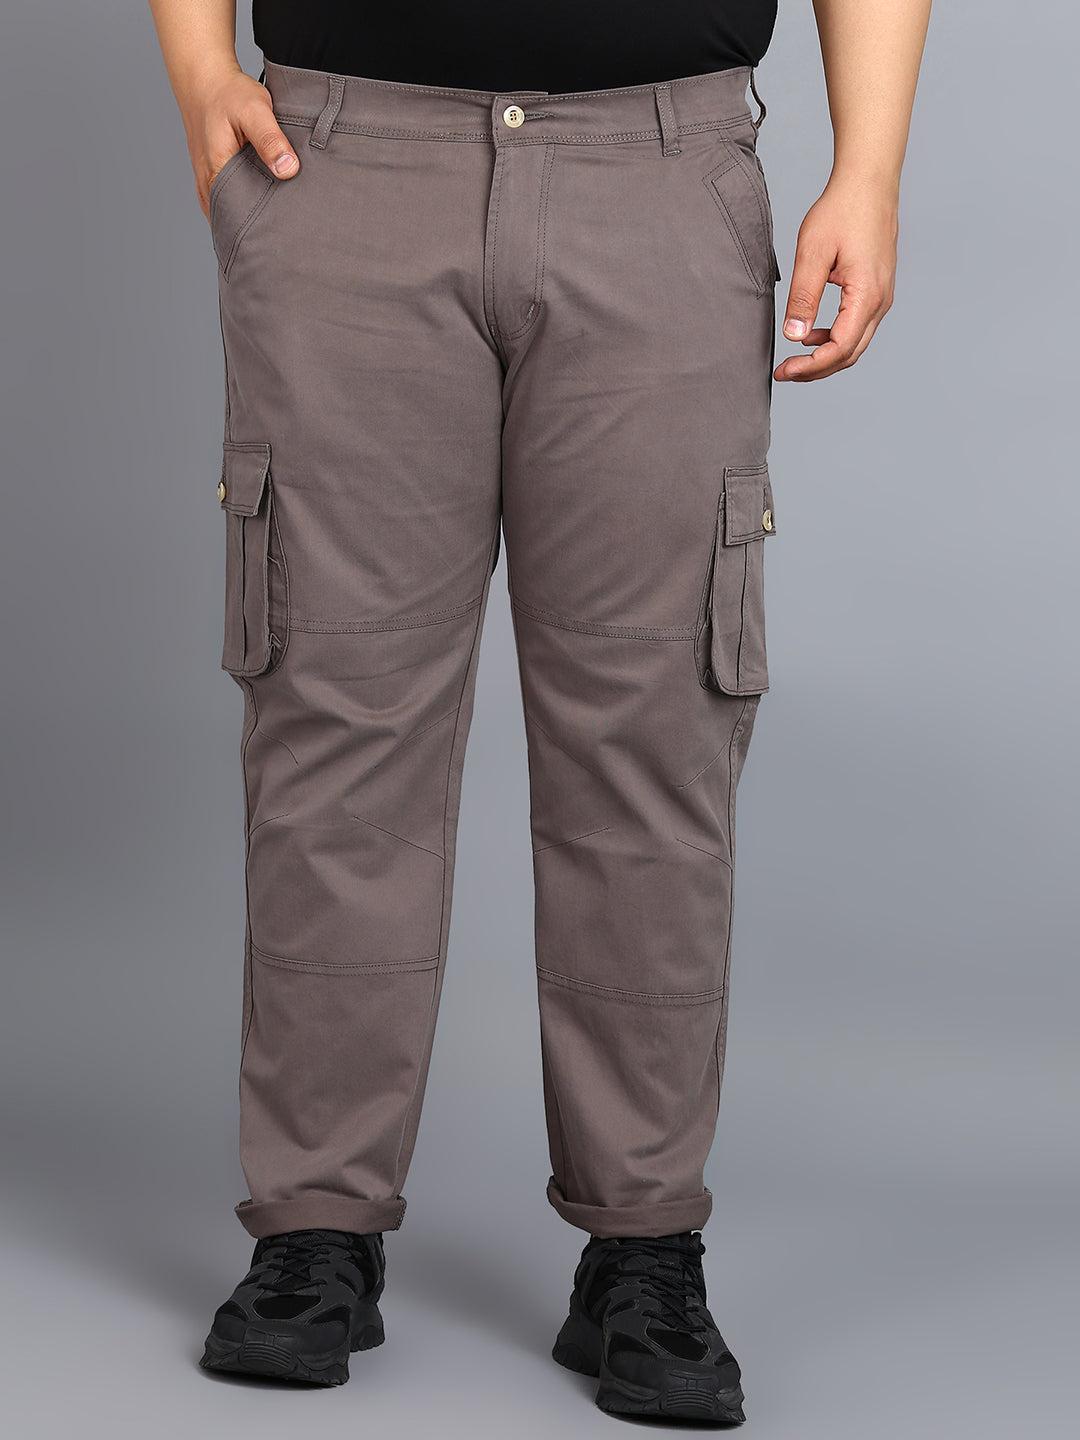 Plus Men's Dark Grey Regular Fit Solid Cargo Chino Pant with 6 Pockets